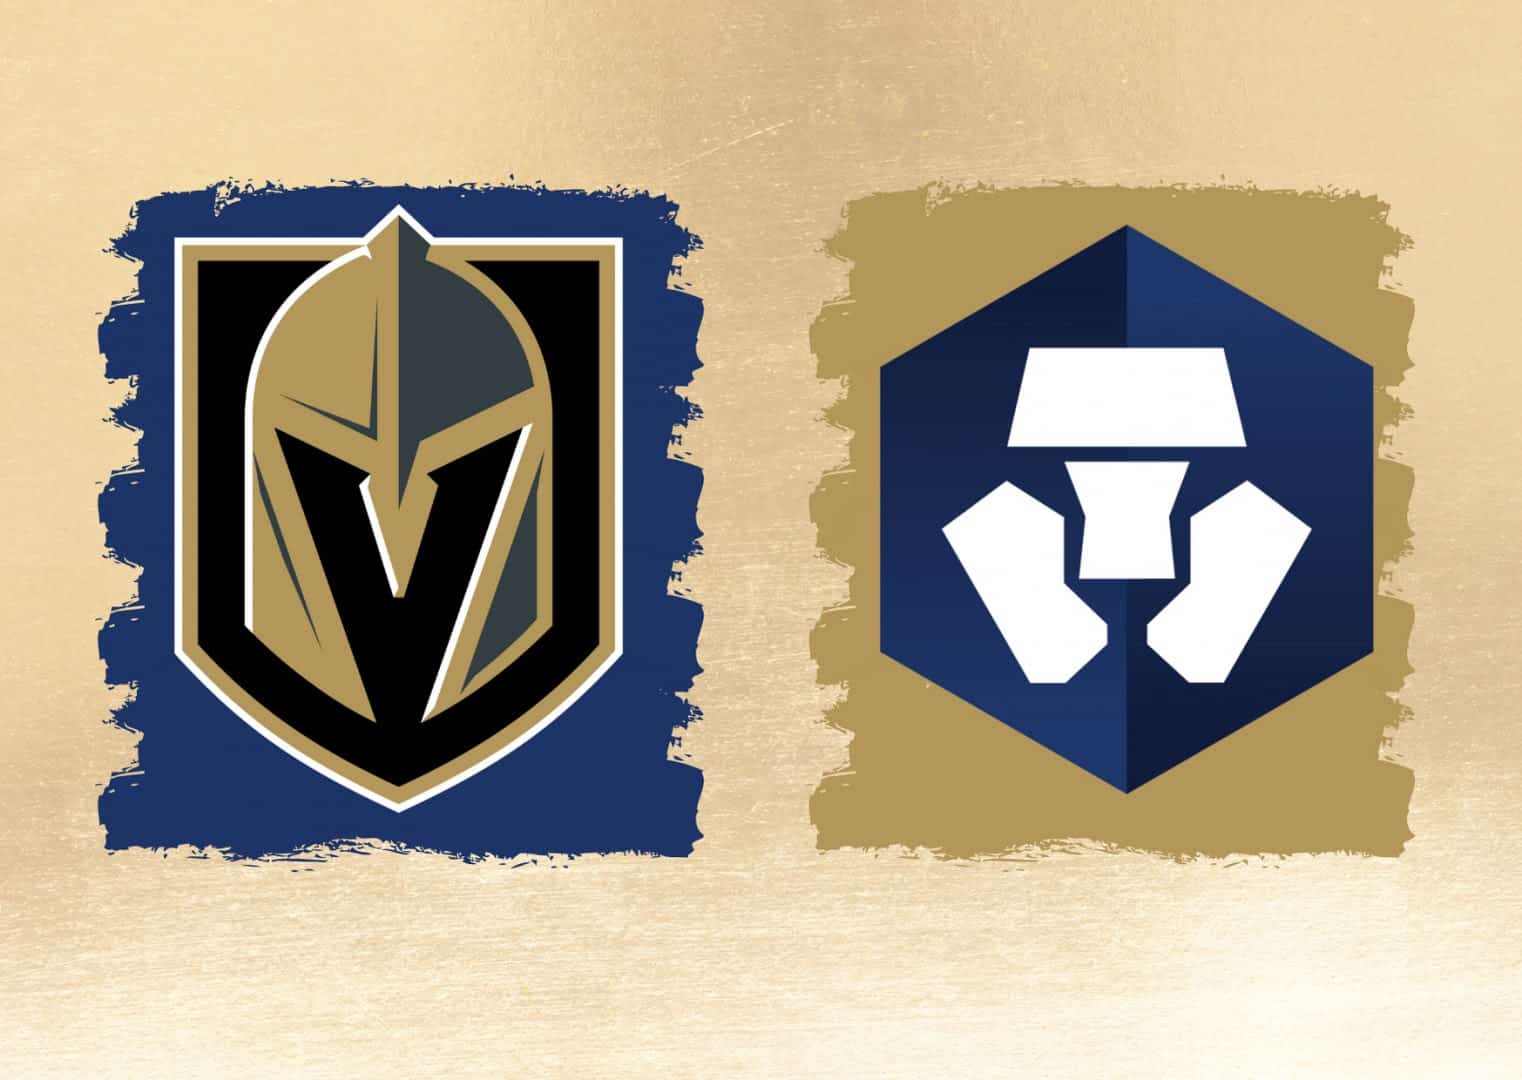 Vegas-golden-knights-launch-first-series-of-collectible-nfts-featuring-unique-vgk-themed-designs-and-premium-redeemables